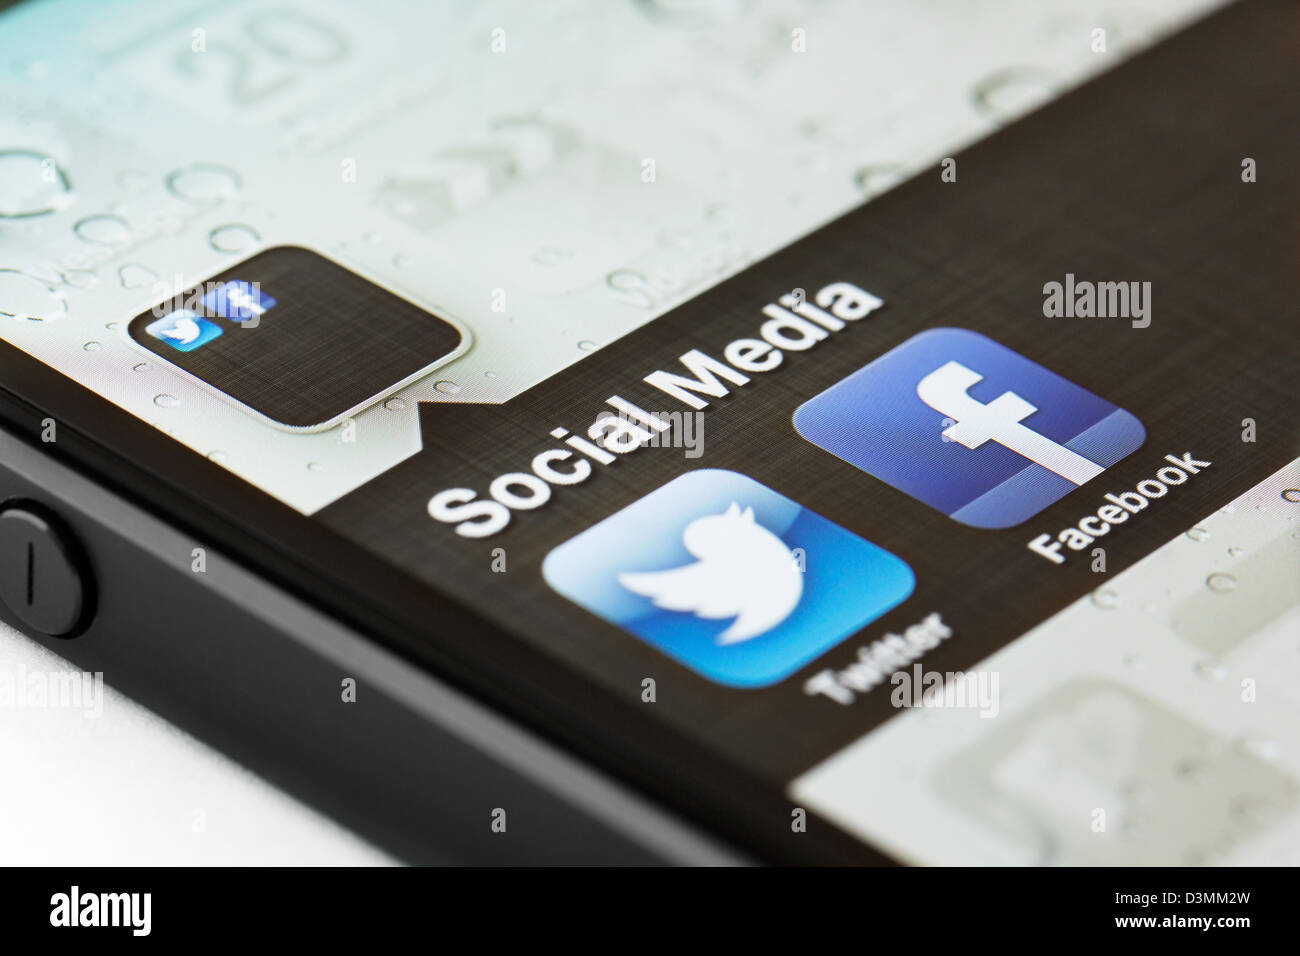 iPhone 5 screen with facebook and twitter social media app icons Stock Photo